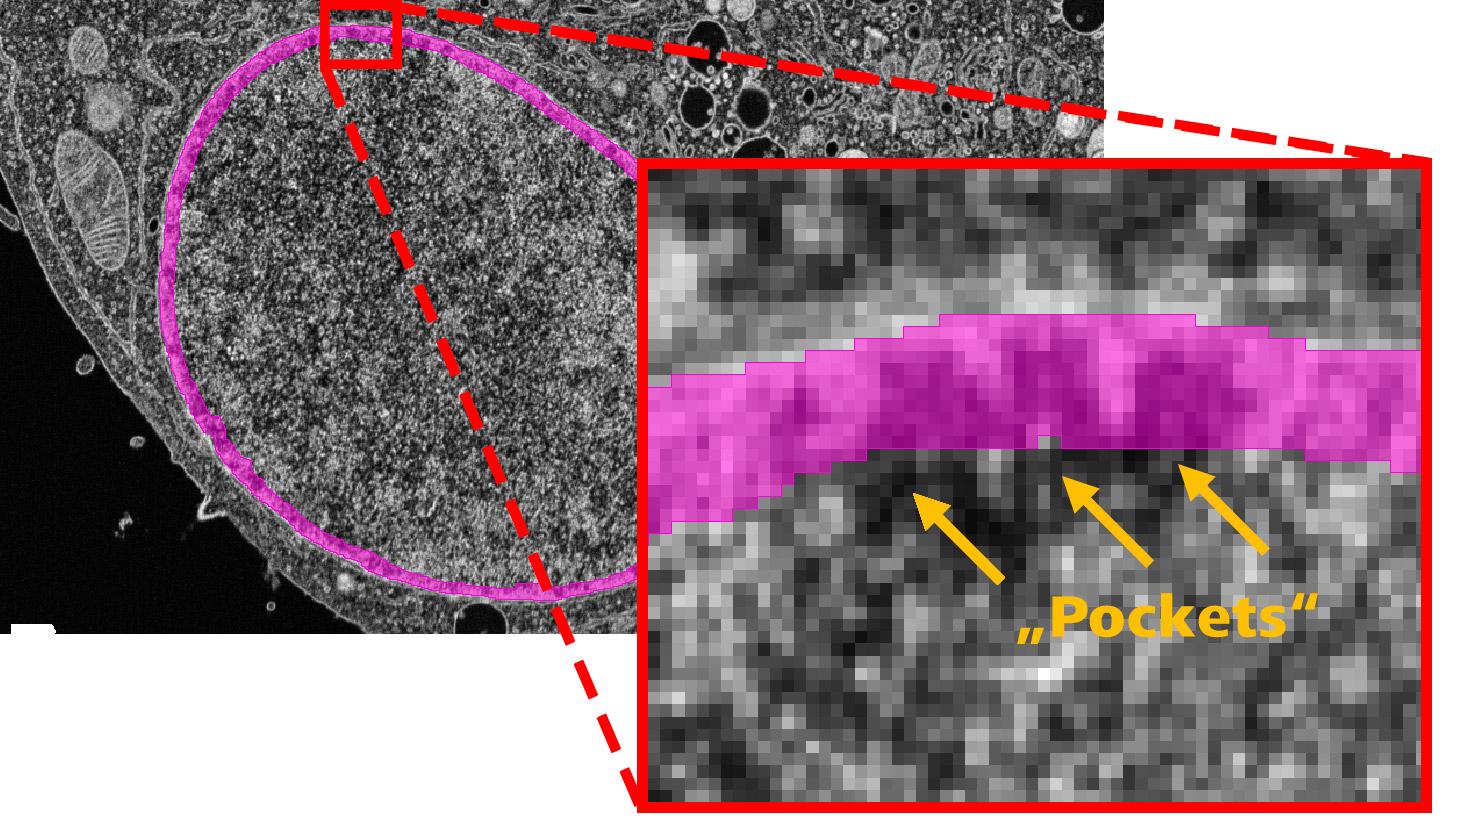 Nuclear membrane and the pocket regions under nuclear pore complexes